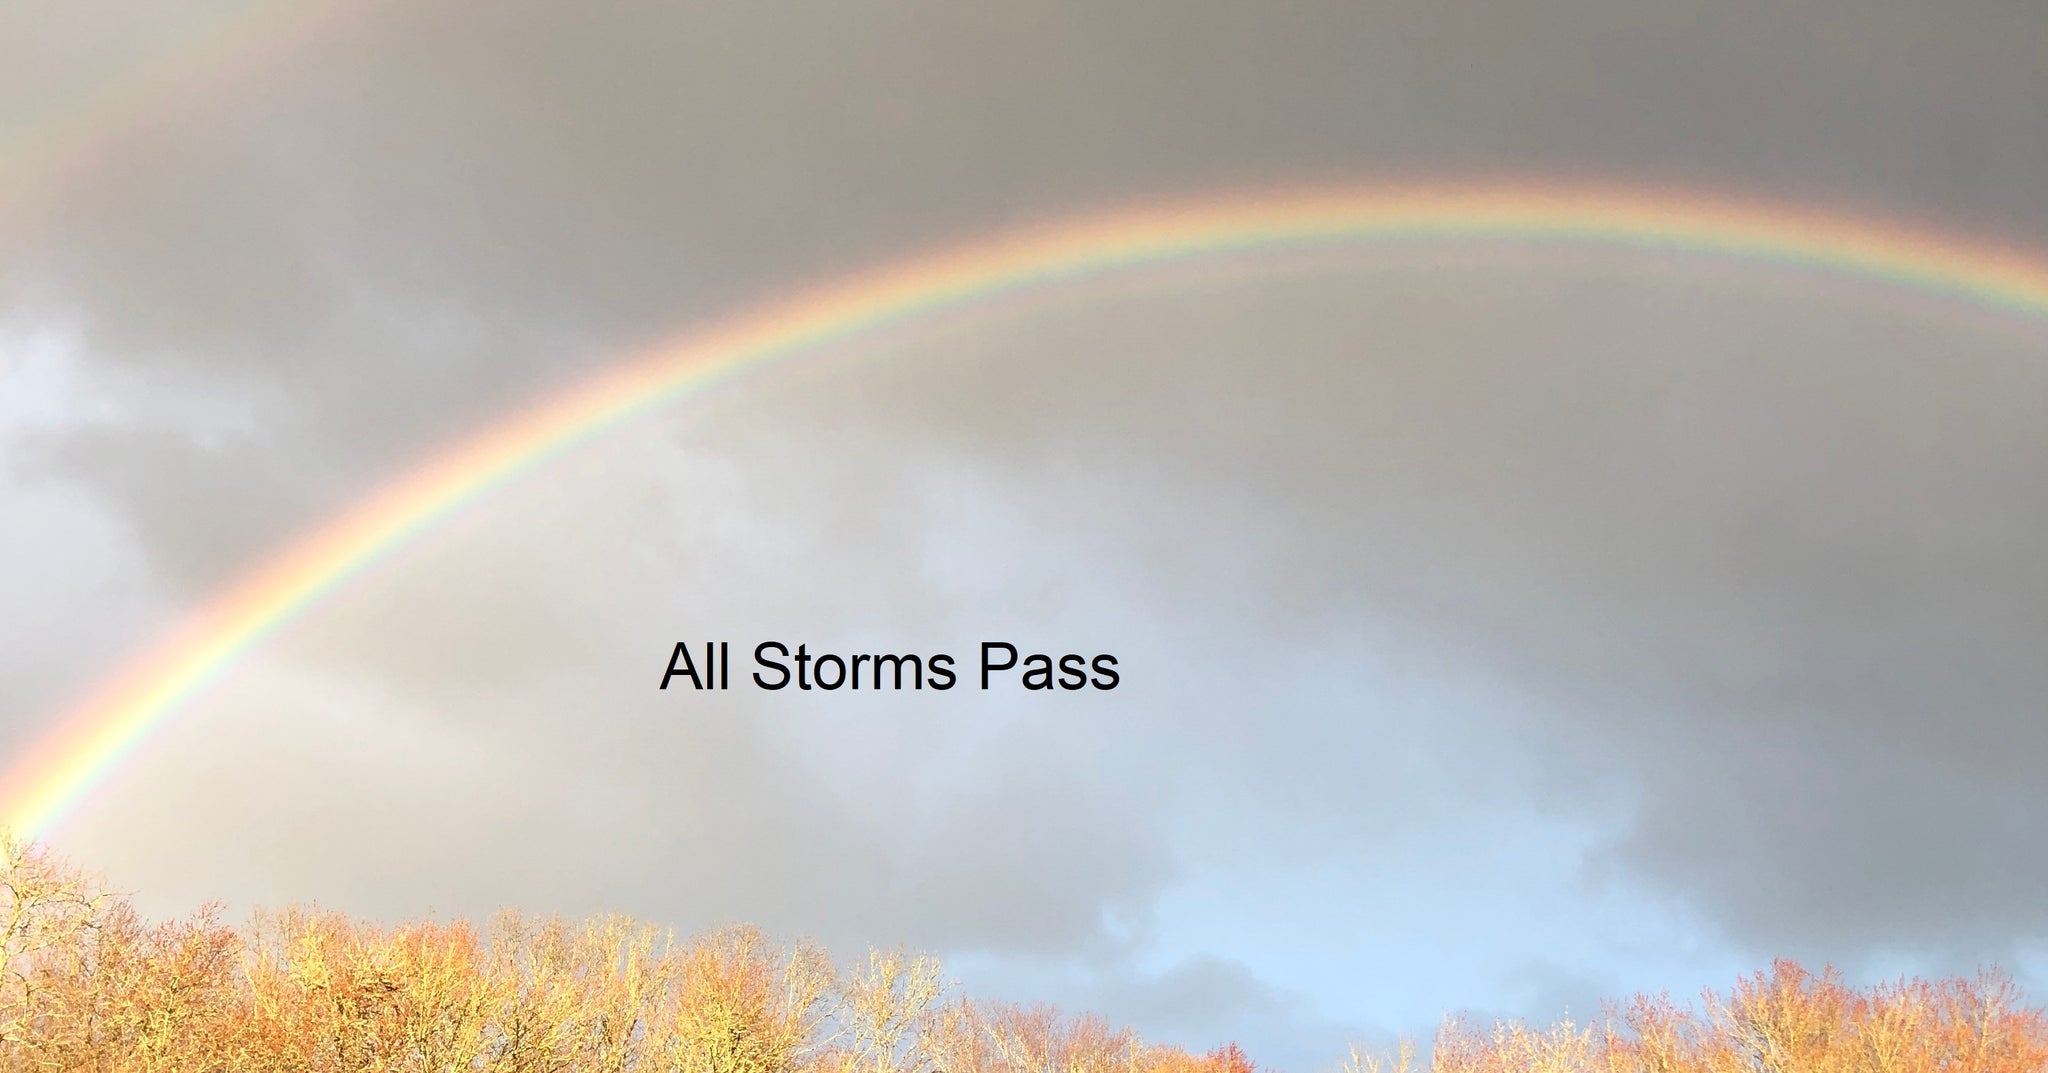 All Storms Pass picture of rainbow